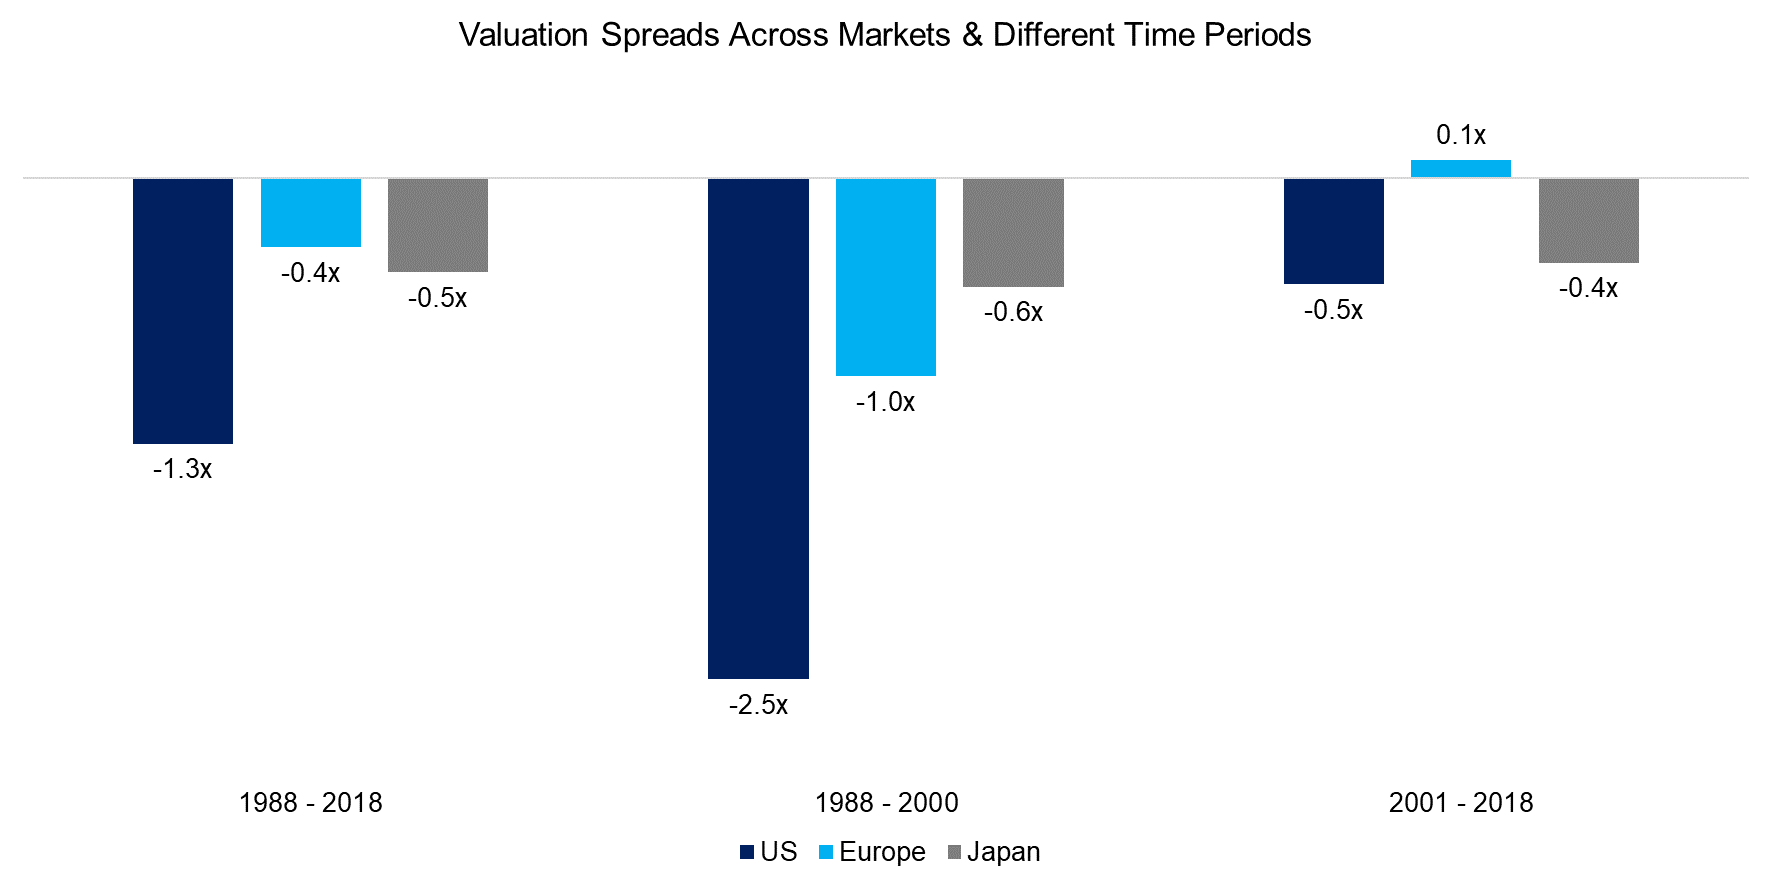 Valuation Spreads Across Markets & Different Time Periods